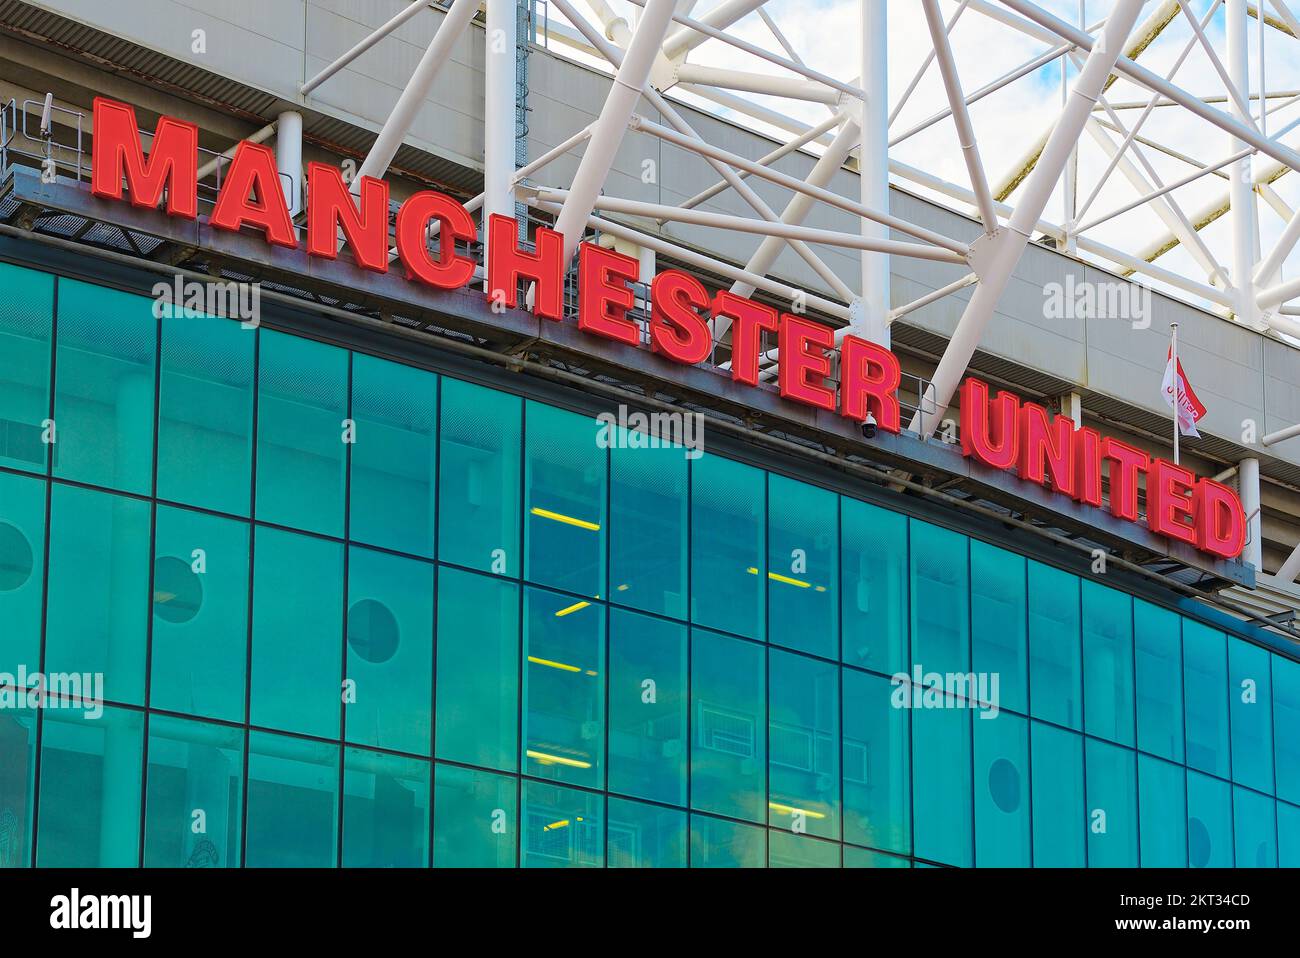 Manchester United Sign on the Clubs Old Trafford Stadium, Trafford, Manchester, United Kingdom Stock Photo